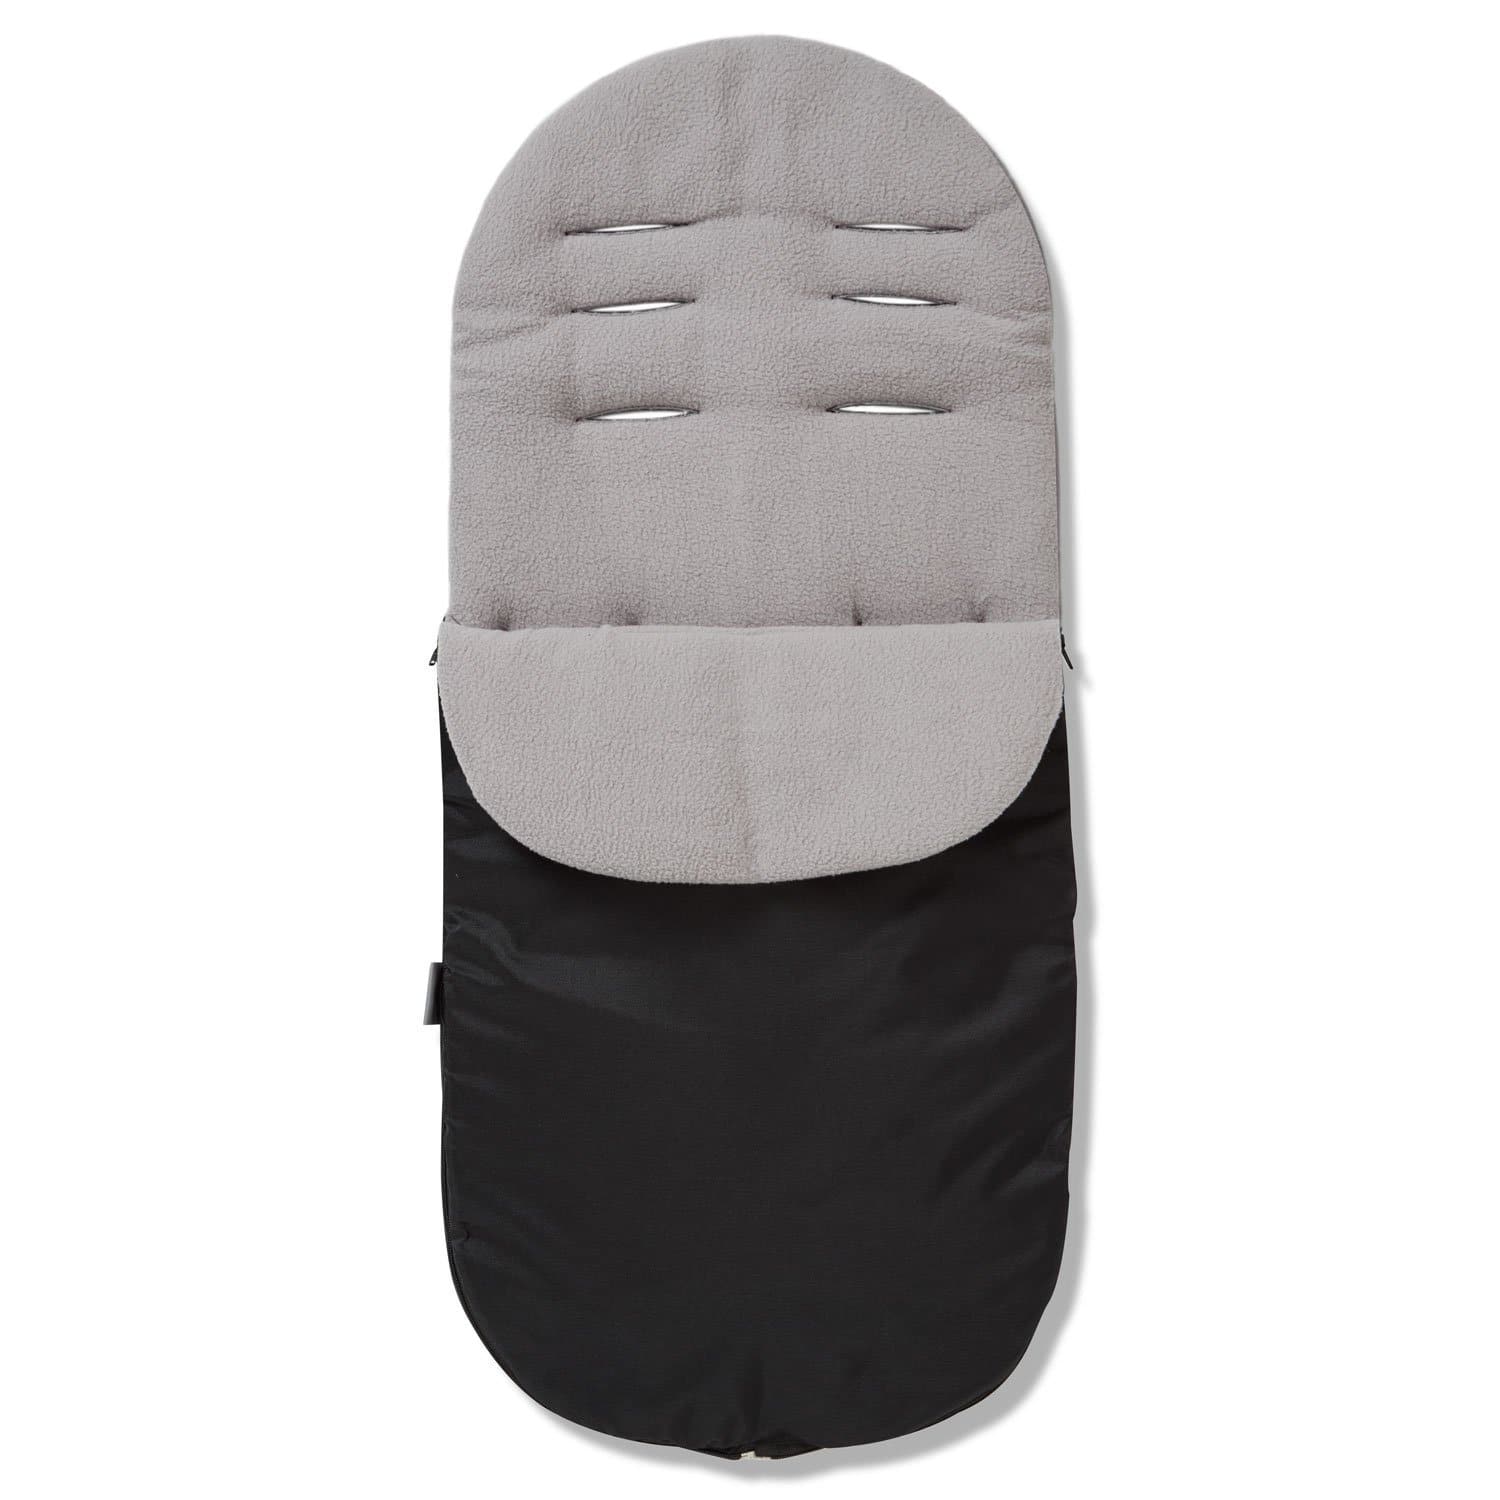 Footmuff / Cosy Toes Compatible with I'coo - Grey / Fits All Models | For Your Little One